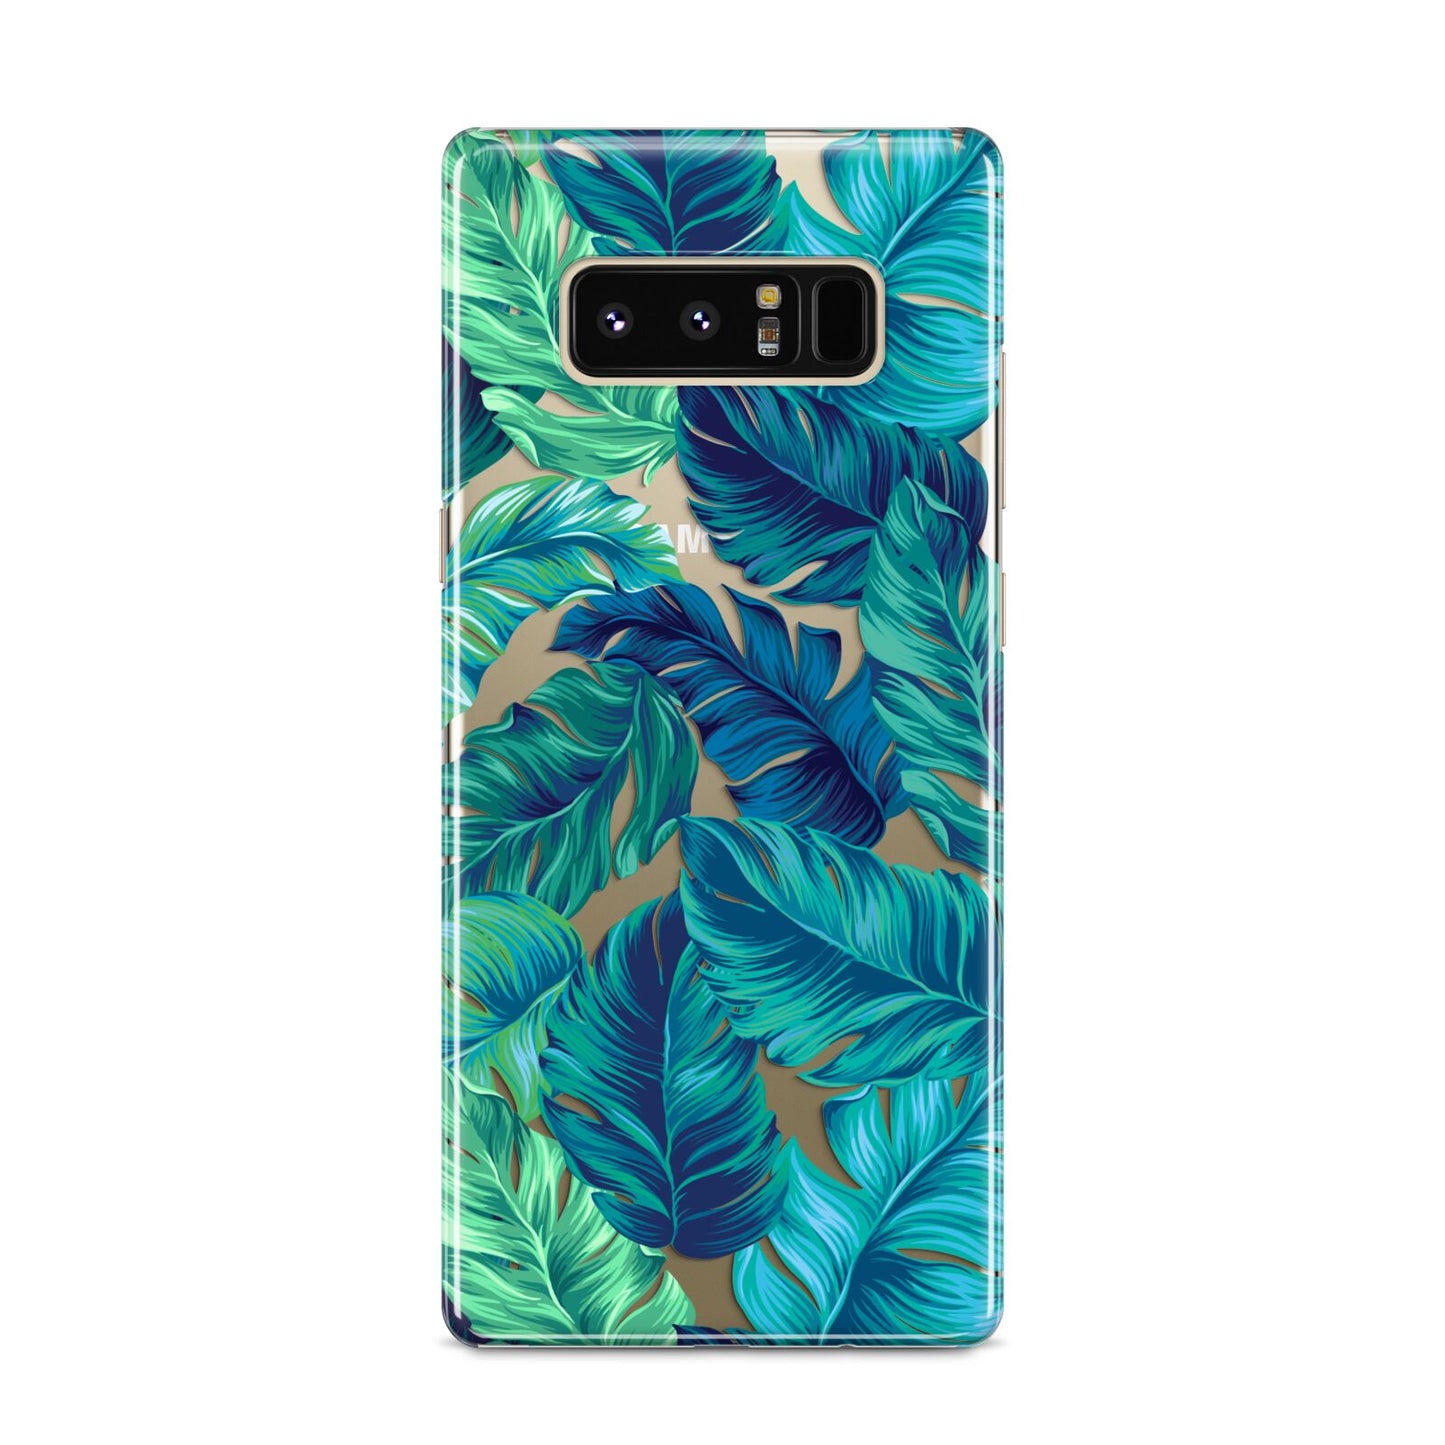 Tropical Leaves Samsung Galaxy S8 Case